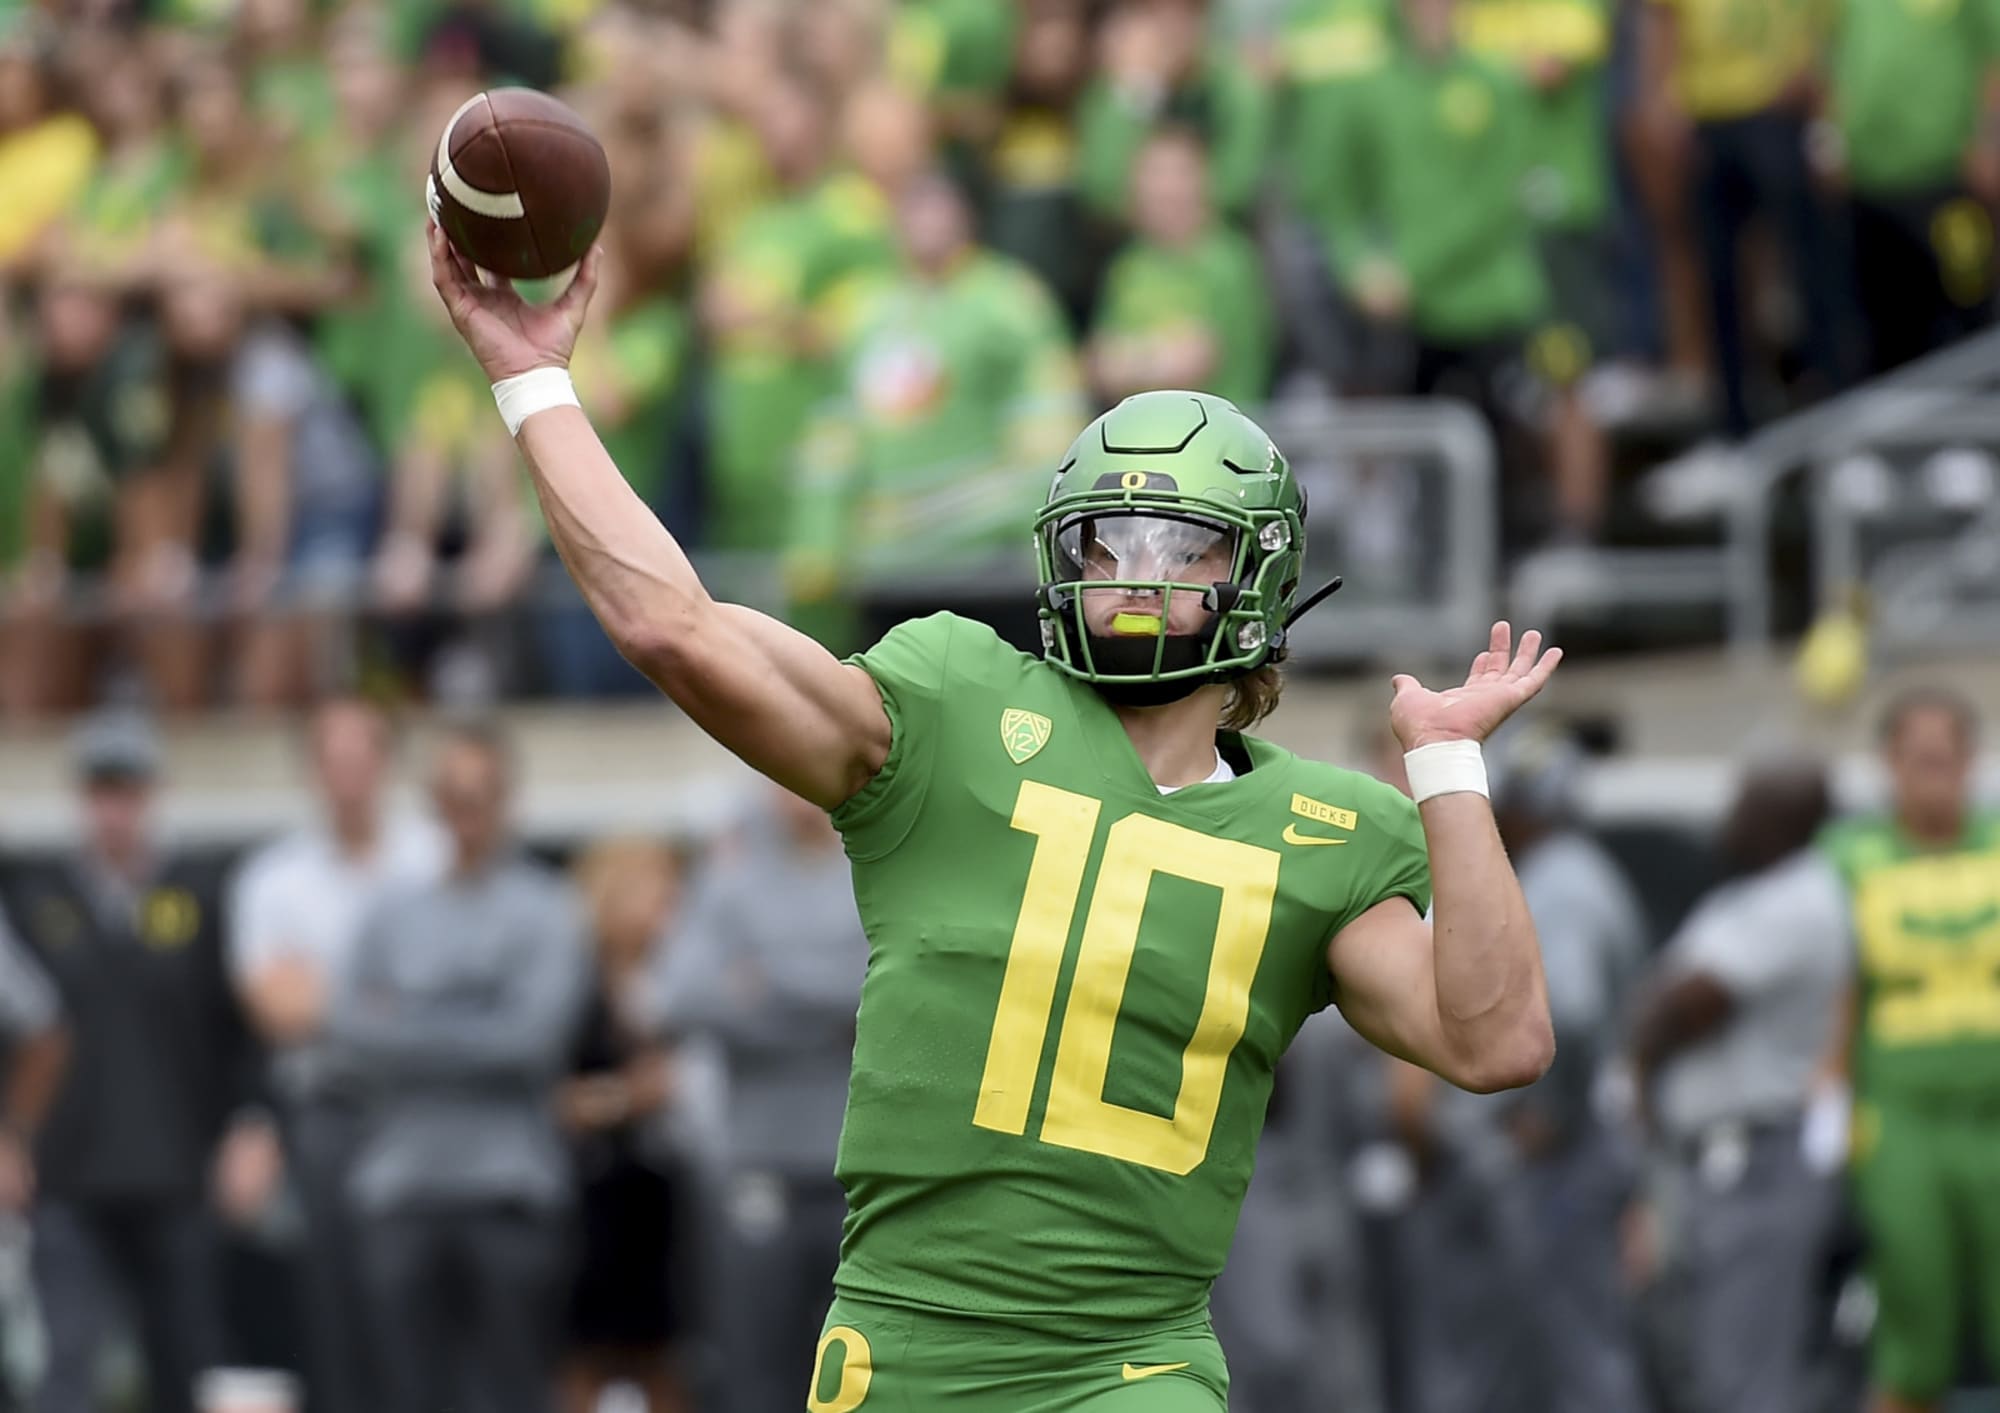 2019 NFL Mock Draft: Projected First Round after Justin Herbert's decision